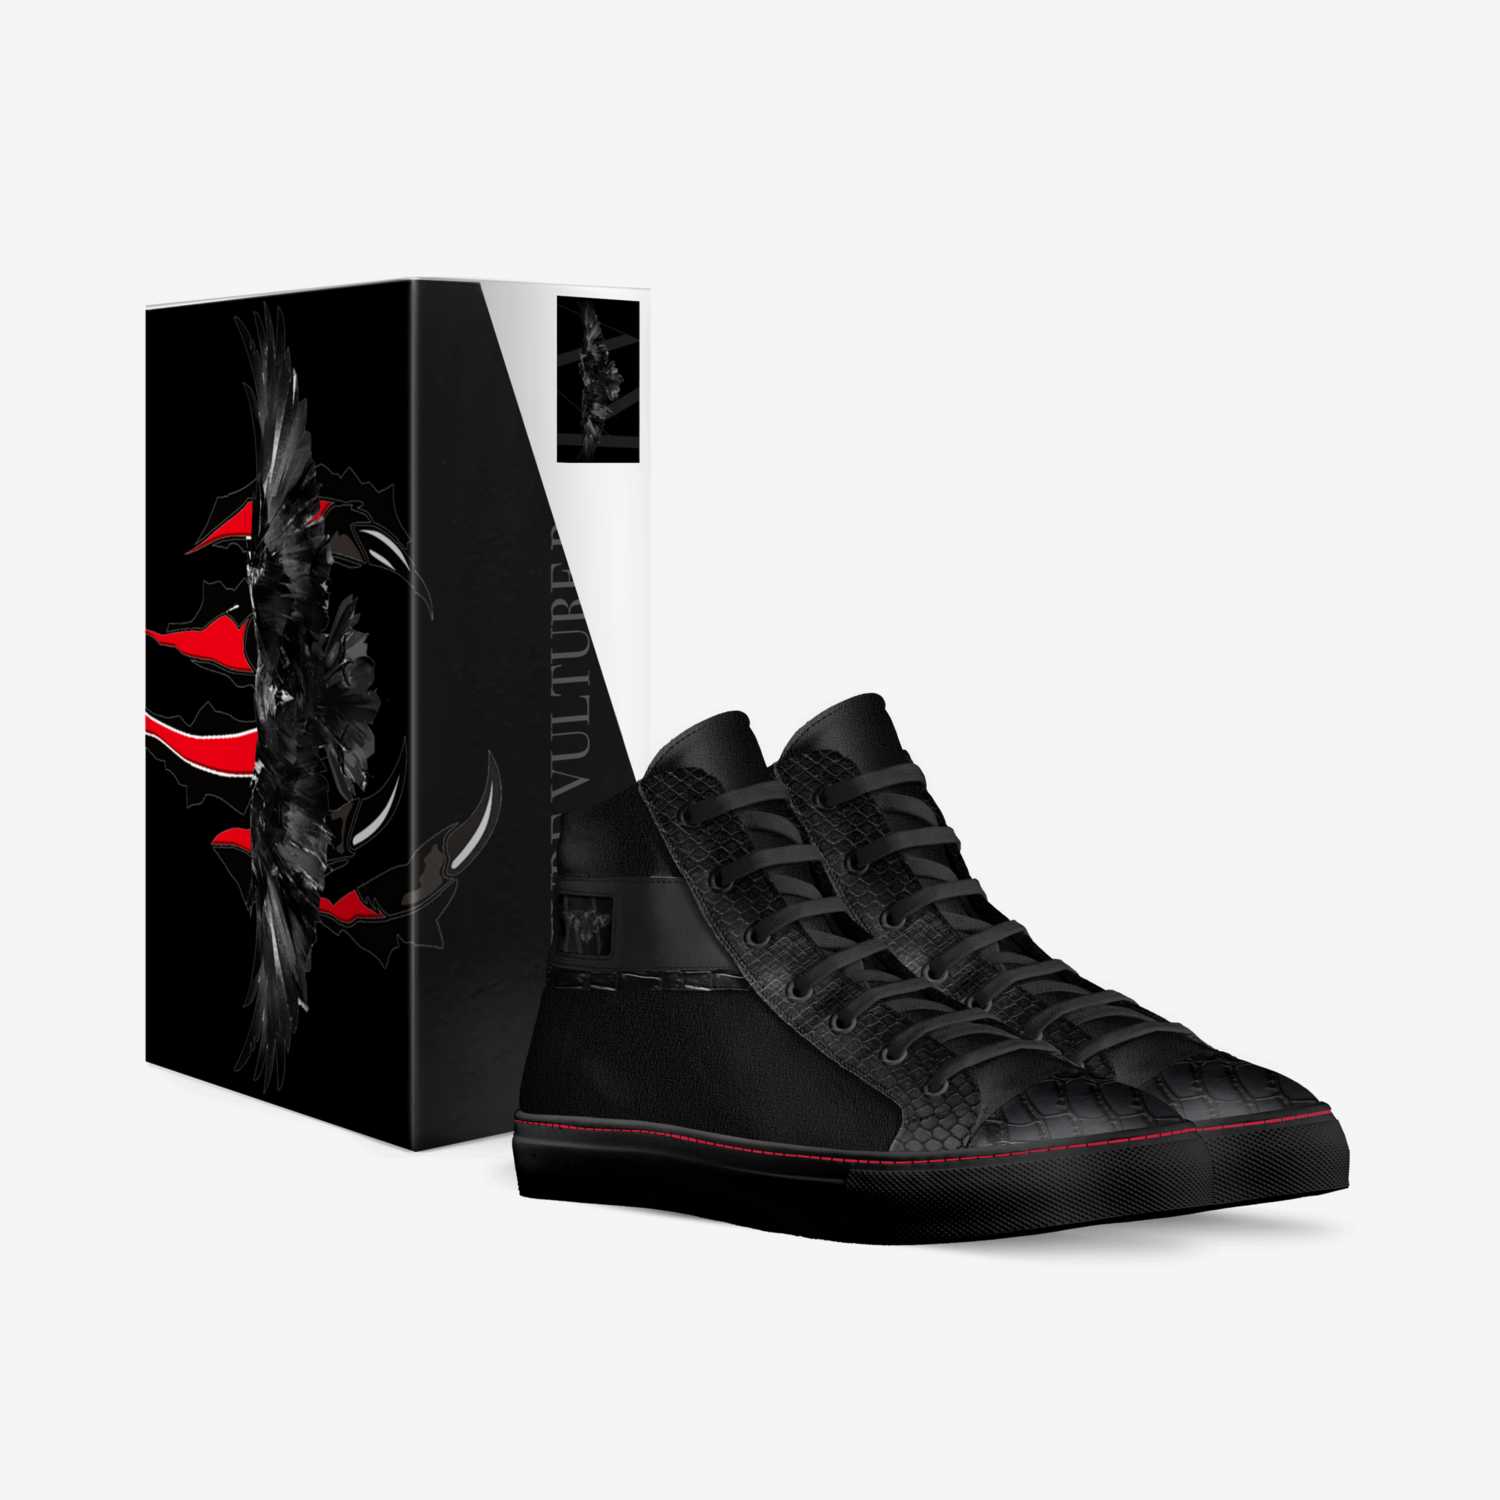 KV RAVEN MID custom made in Italy shoes by Black Art | Box view